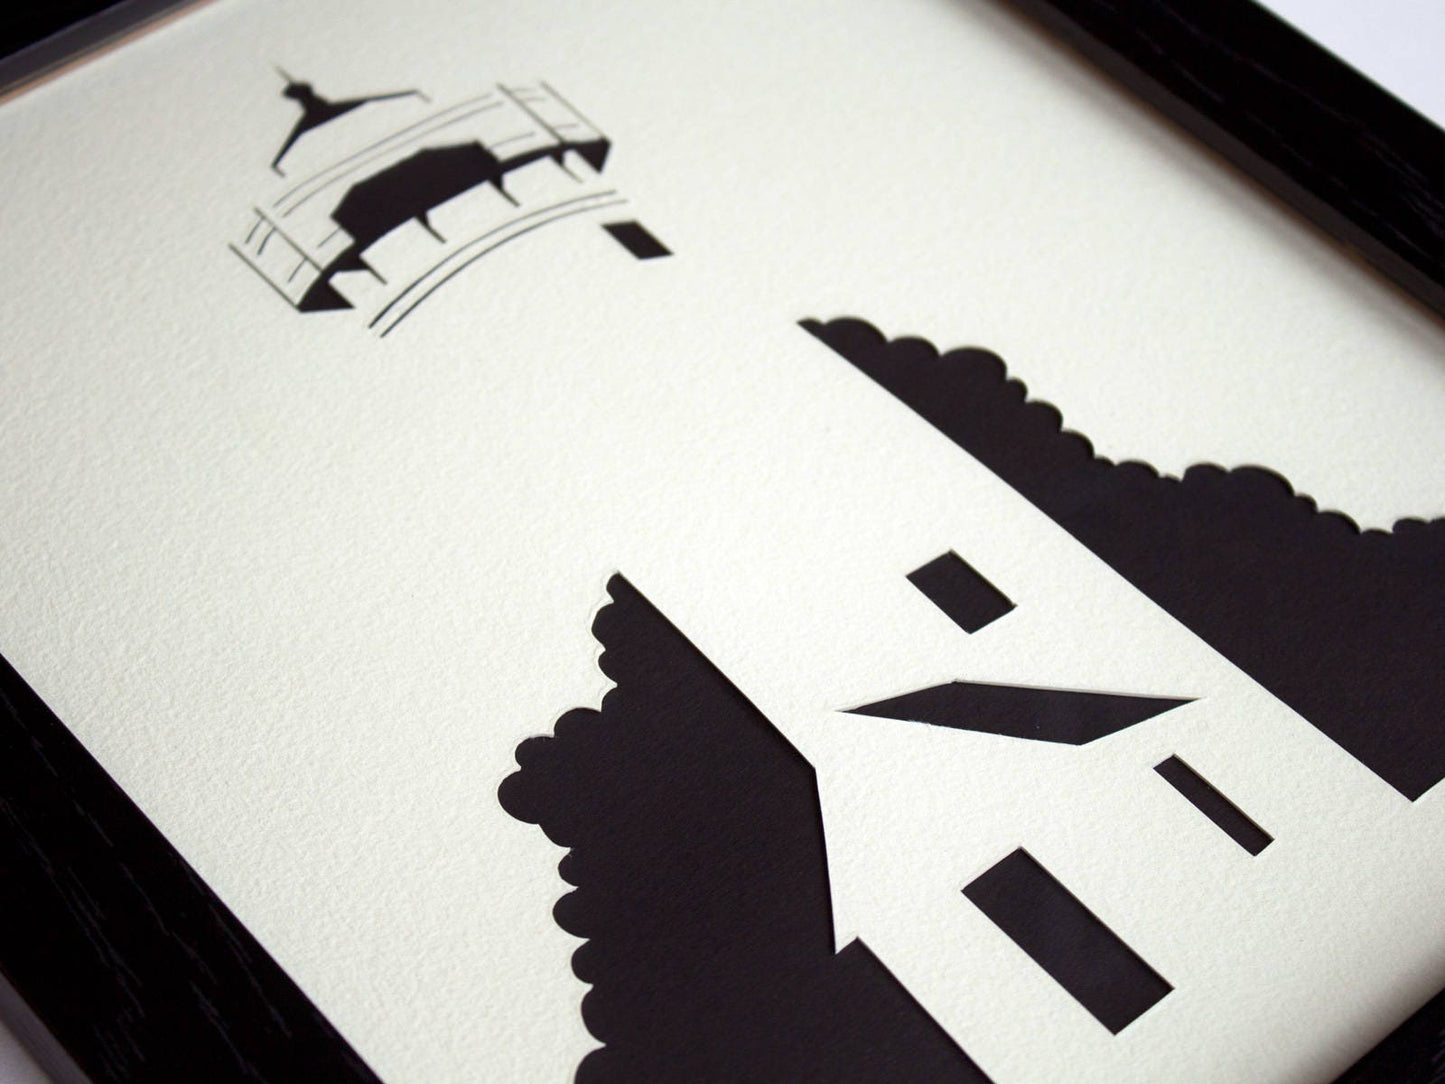 Framed simple black and white cut paper illustration of the West Chop Light House in Vineyard Haven, Martha's Vineyard.